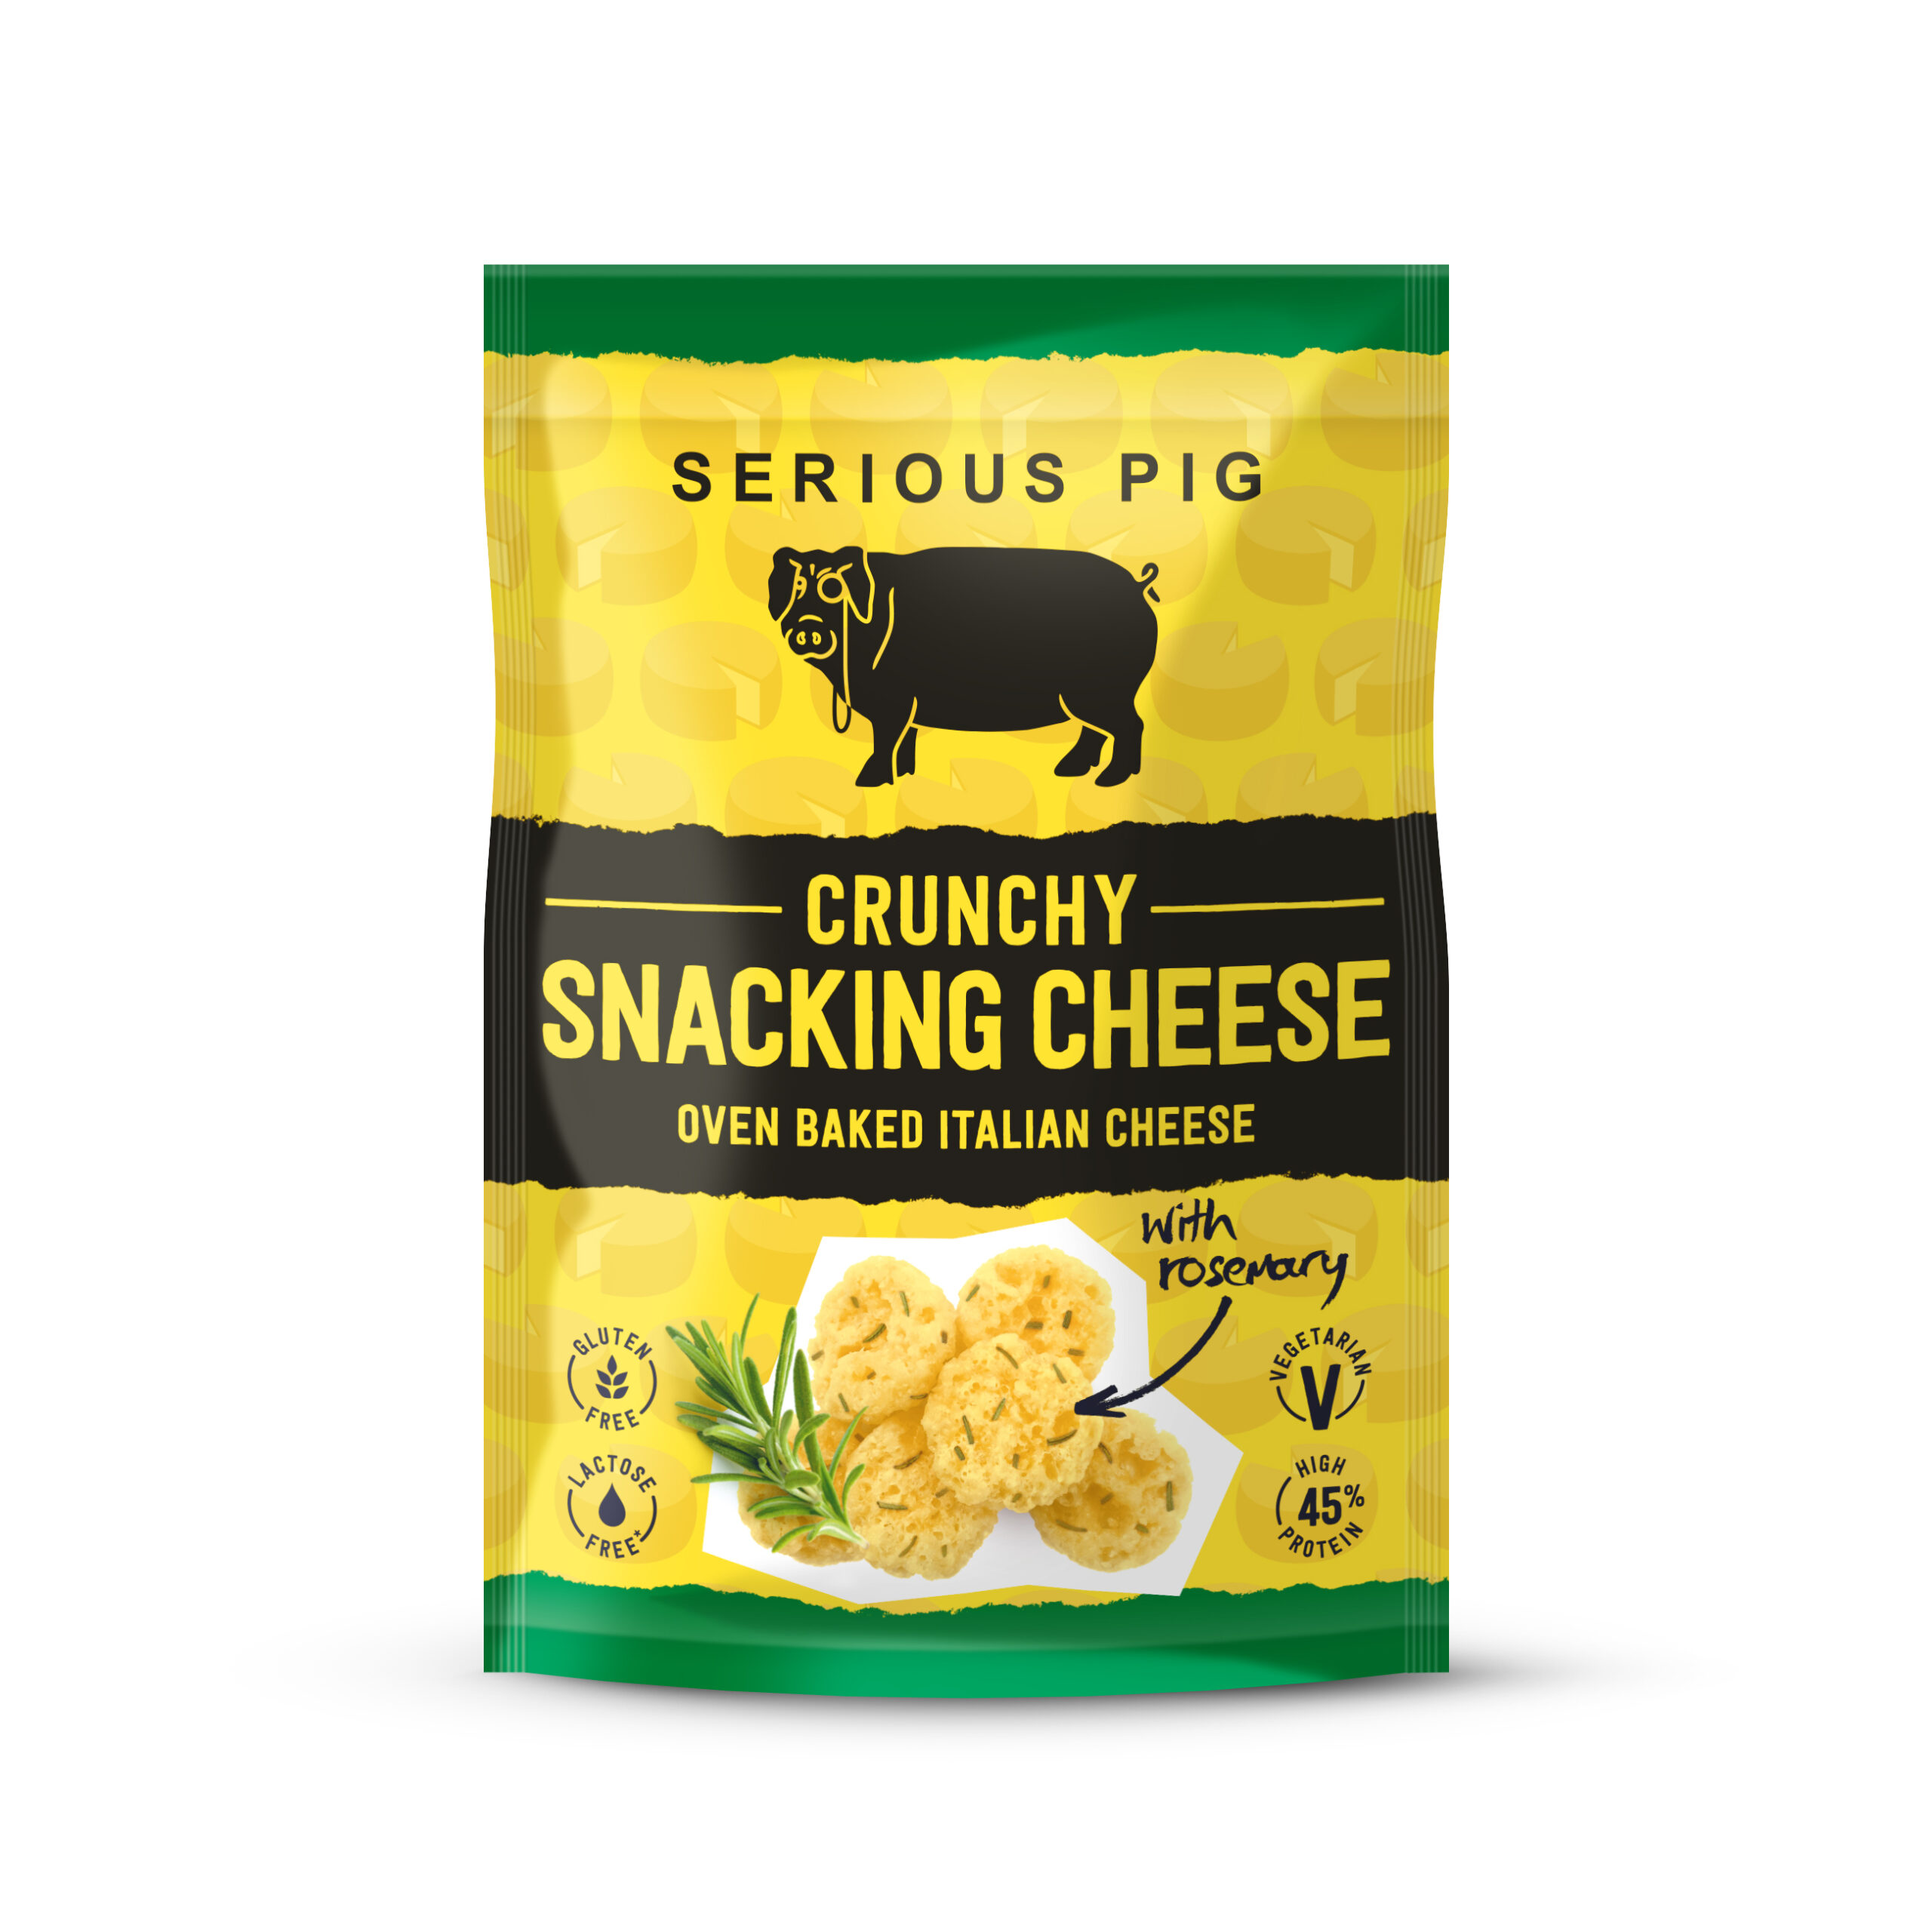 Mislukking Ik heb een Engelse les Koppeling Crunchy Snacking Cheese with Rosemary - Serious Pig